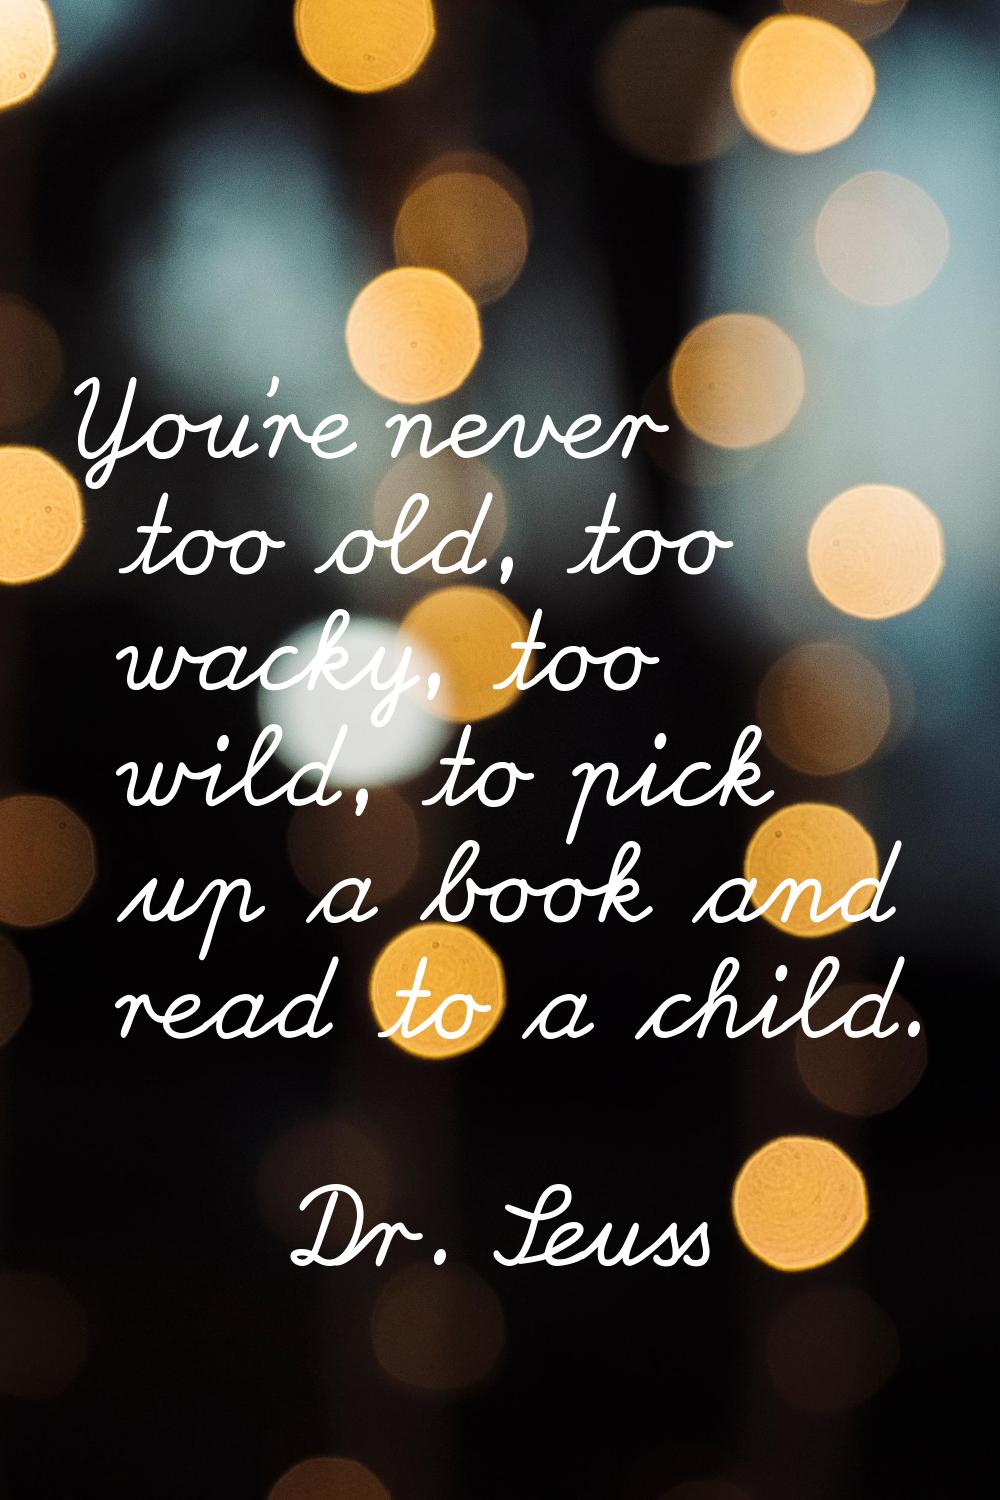 You're never too old, too wacky, too wild, to pick up a book and read to a child.